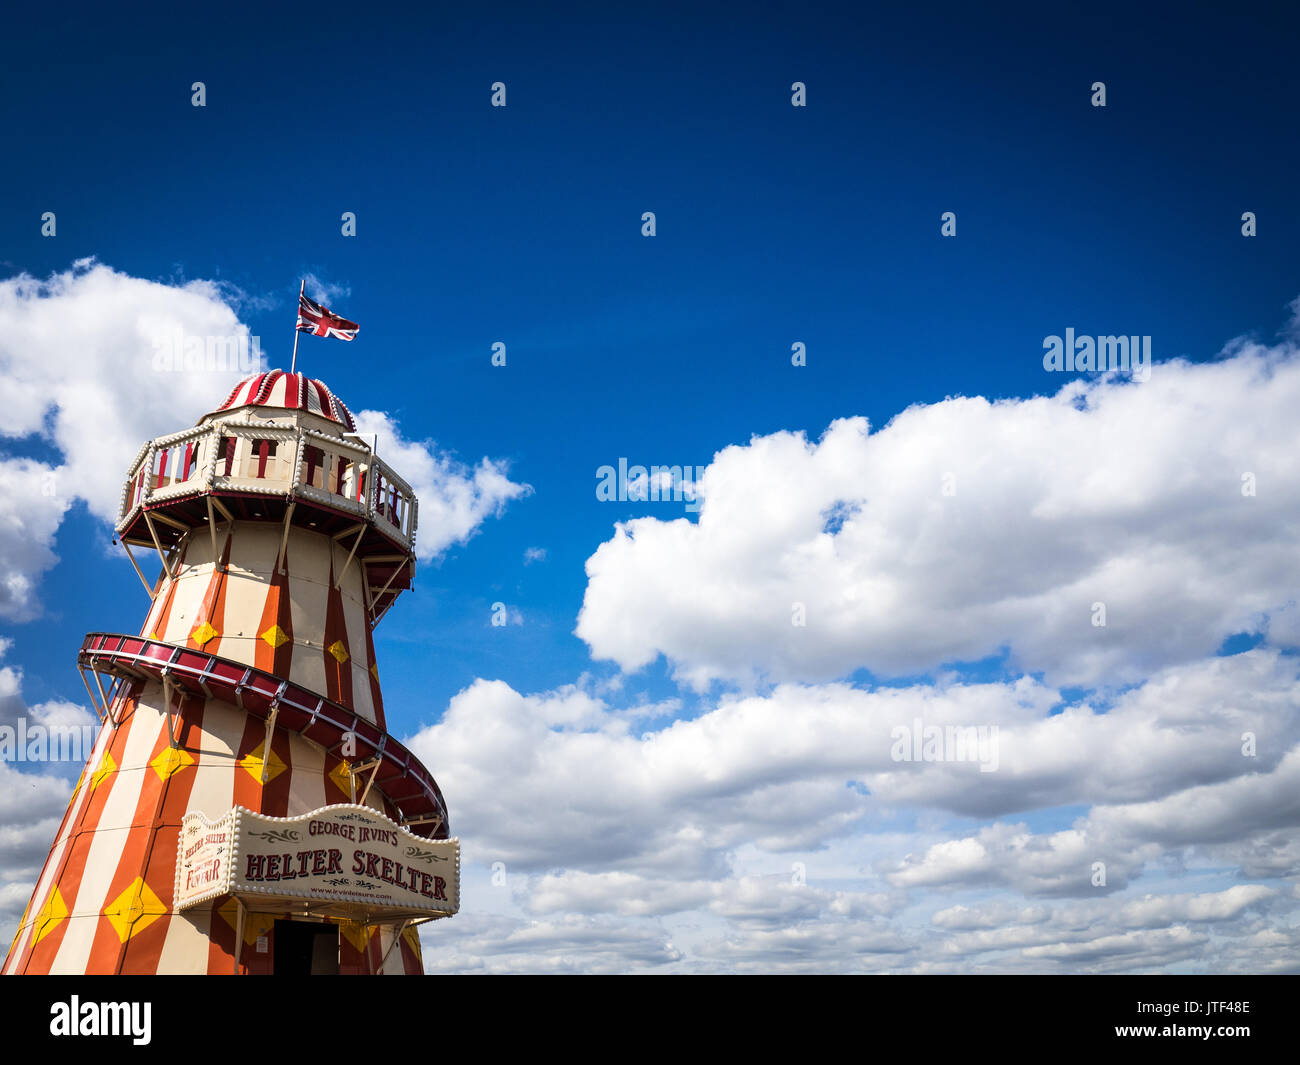 Helter Skelter, Greenwich, London on a sunny day - George Irvin's Helter Skelter in Greenwich London, near the Cutty Sark on the Thames Riverside Stock Photo